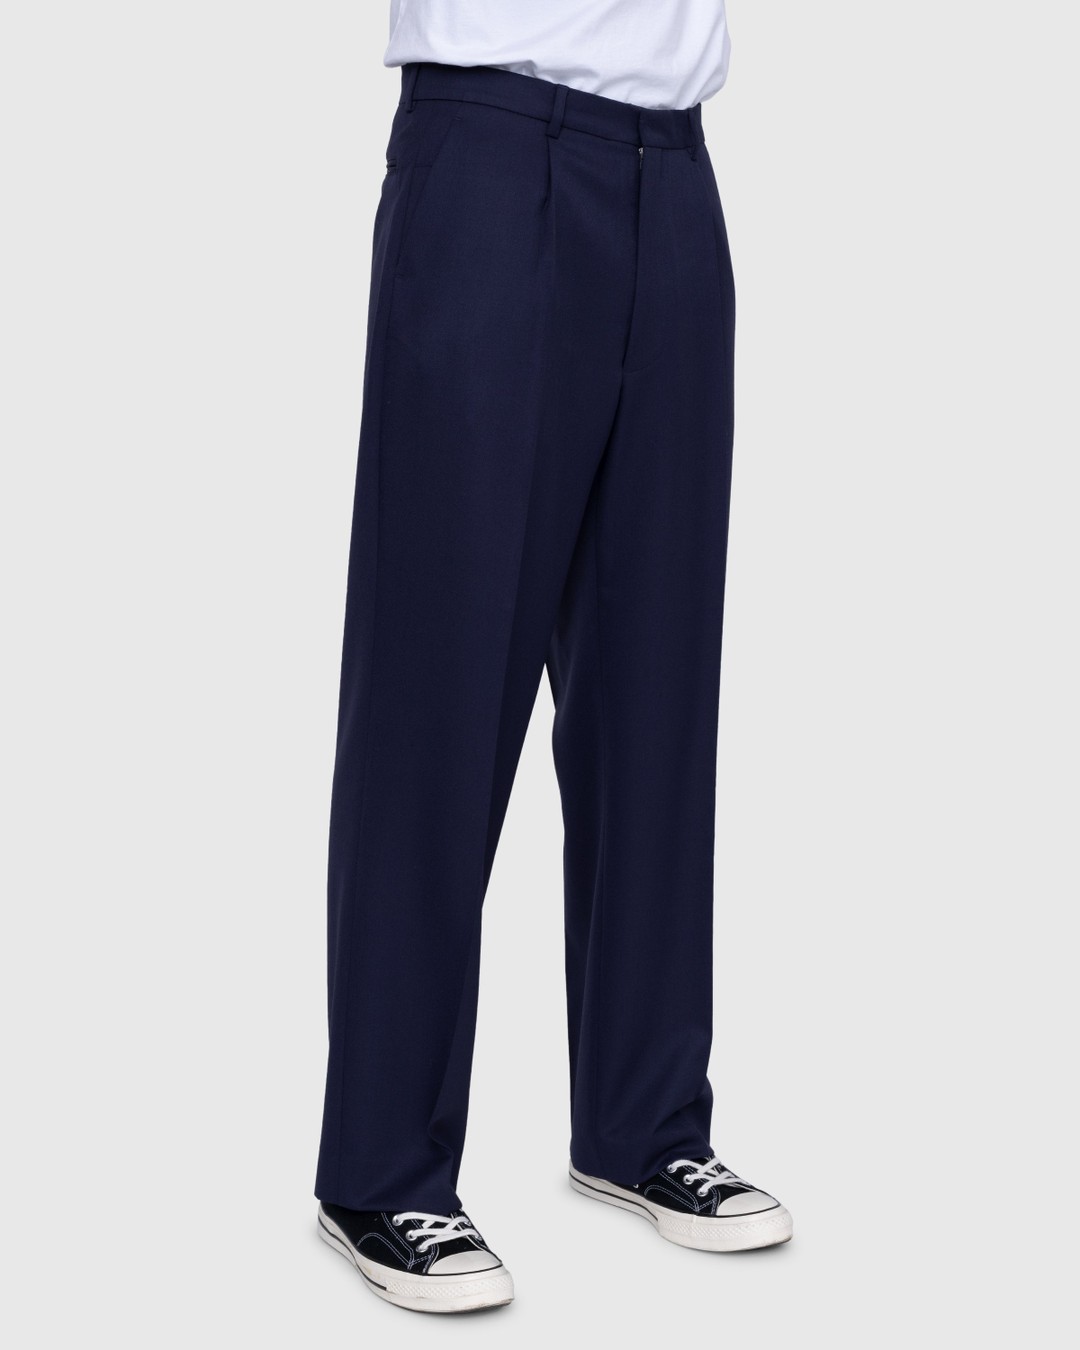 Highsnobiety – Wool Dress Pant Navy - Trousers - Blue - Image 3